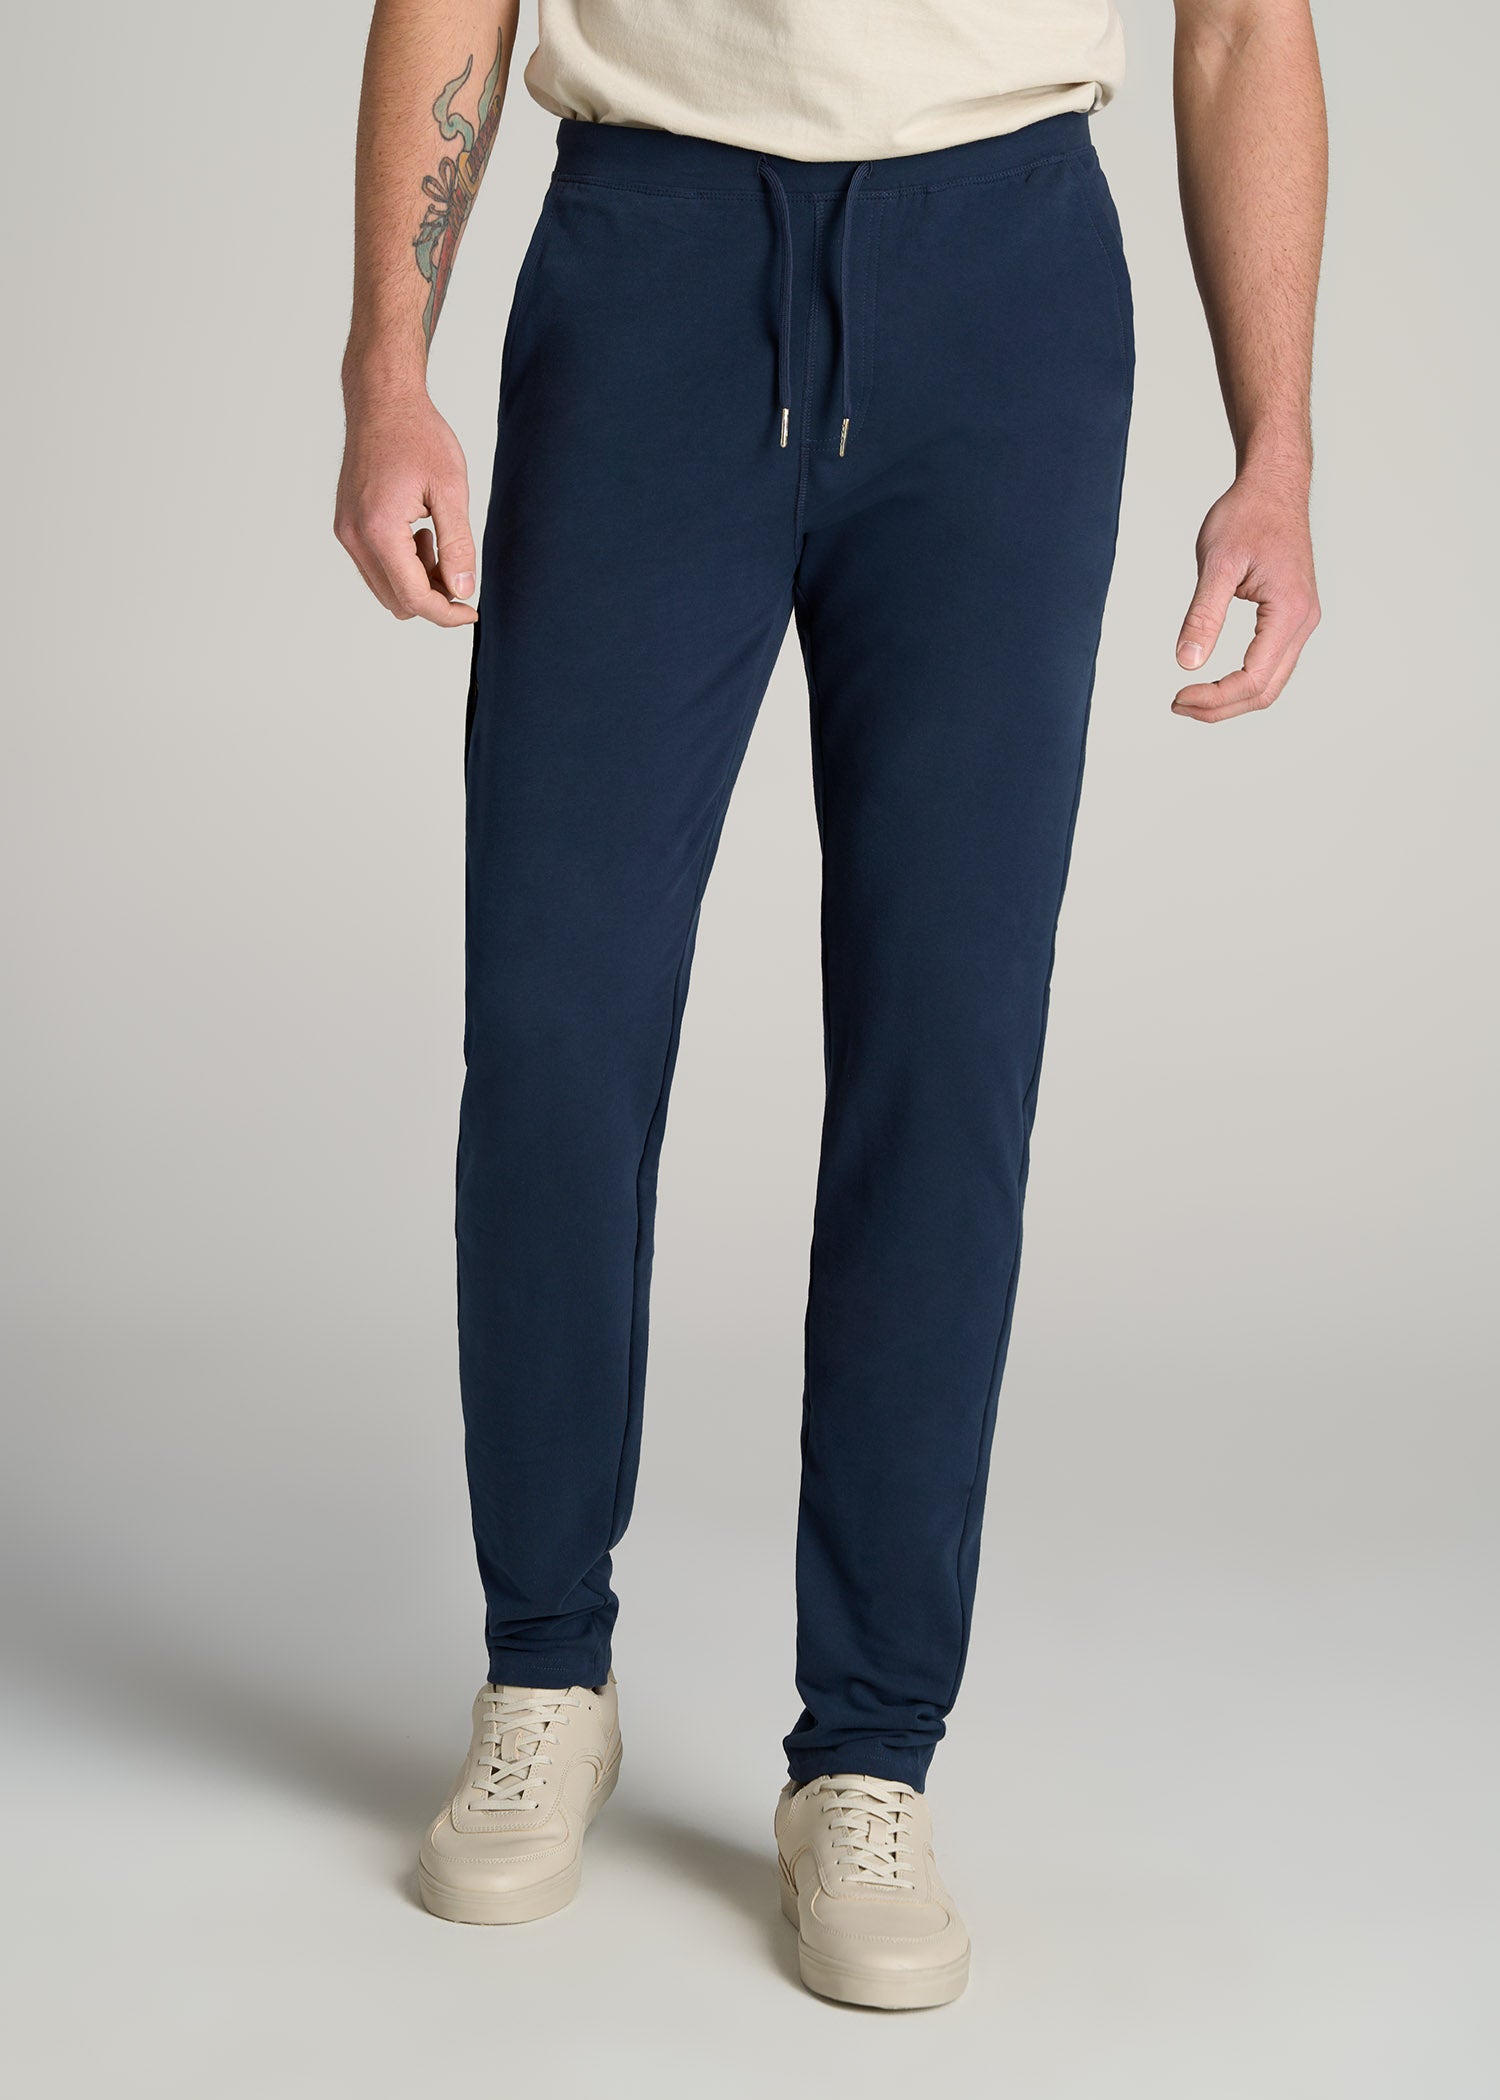 Microsanded French Terry Sweatpants for Tall Men in Marine Navy